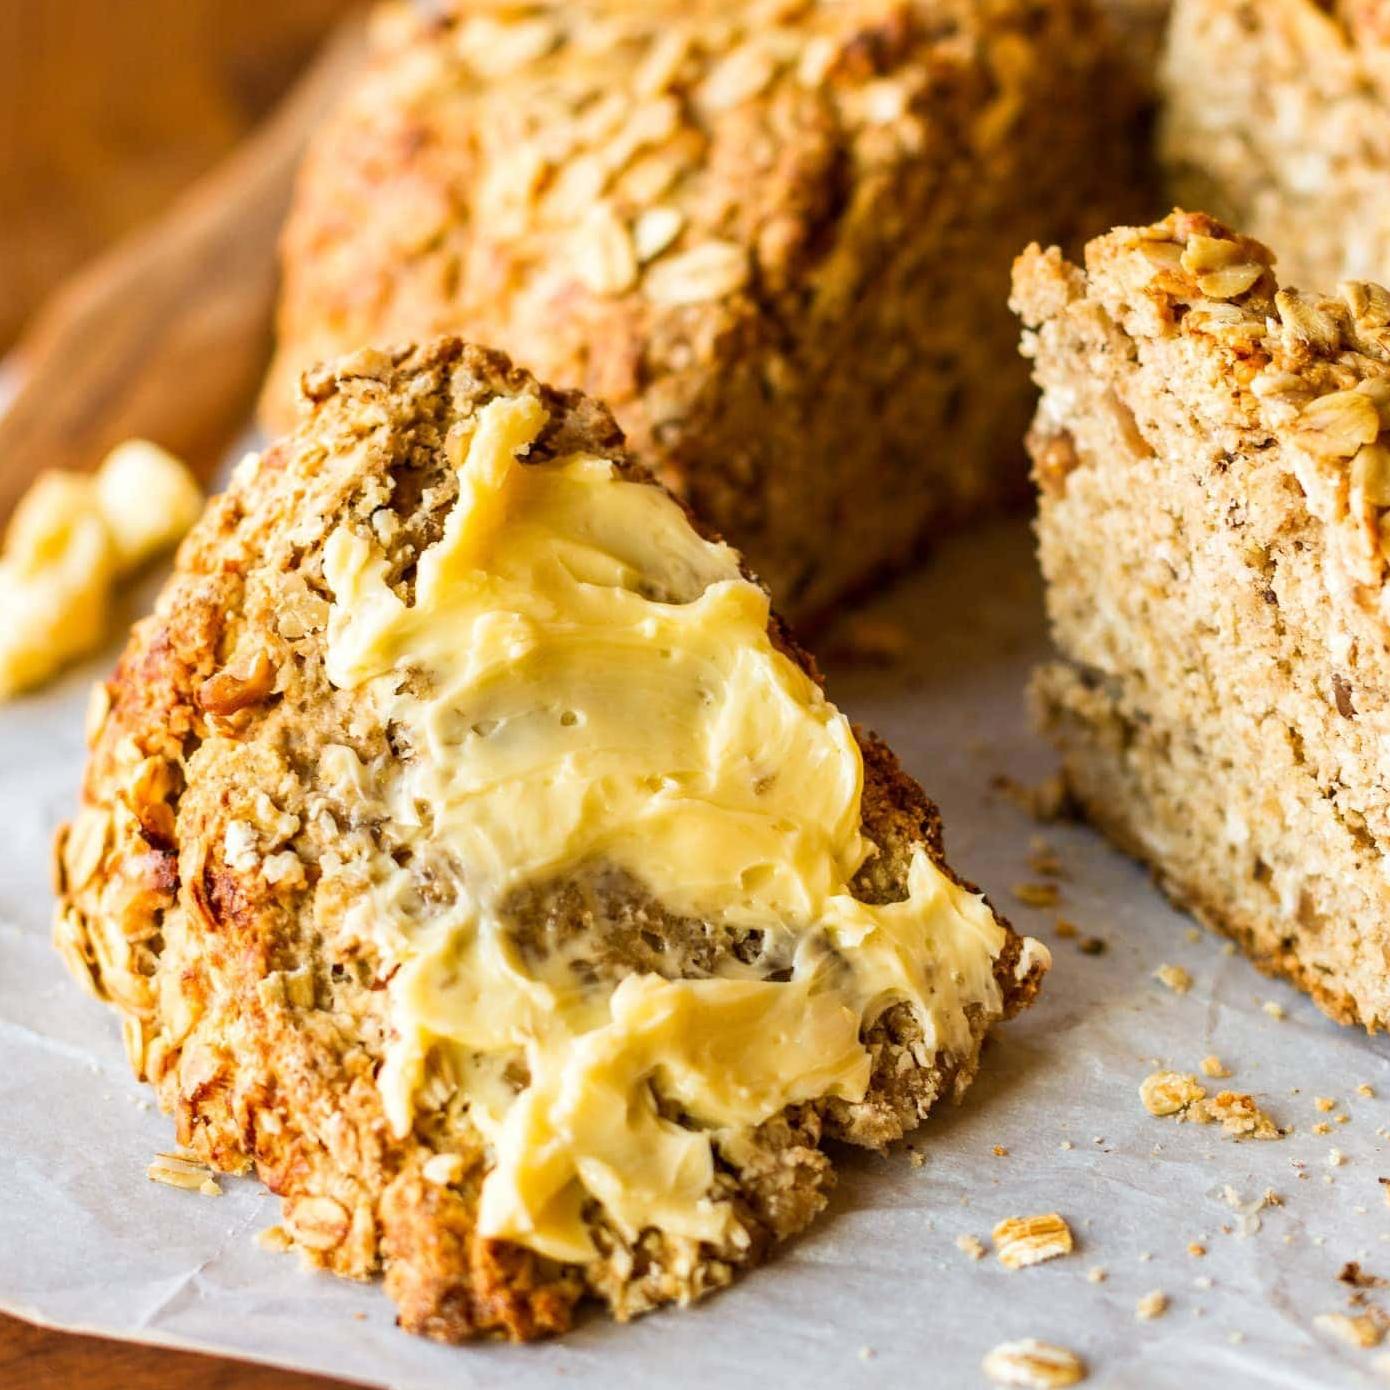  Warm your heart and your tummy with a slice of this bread.